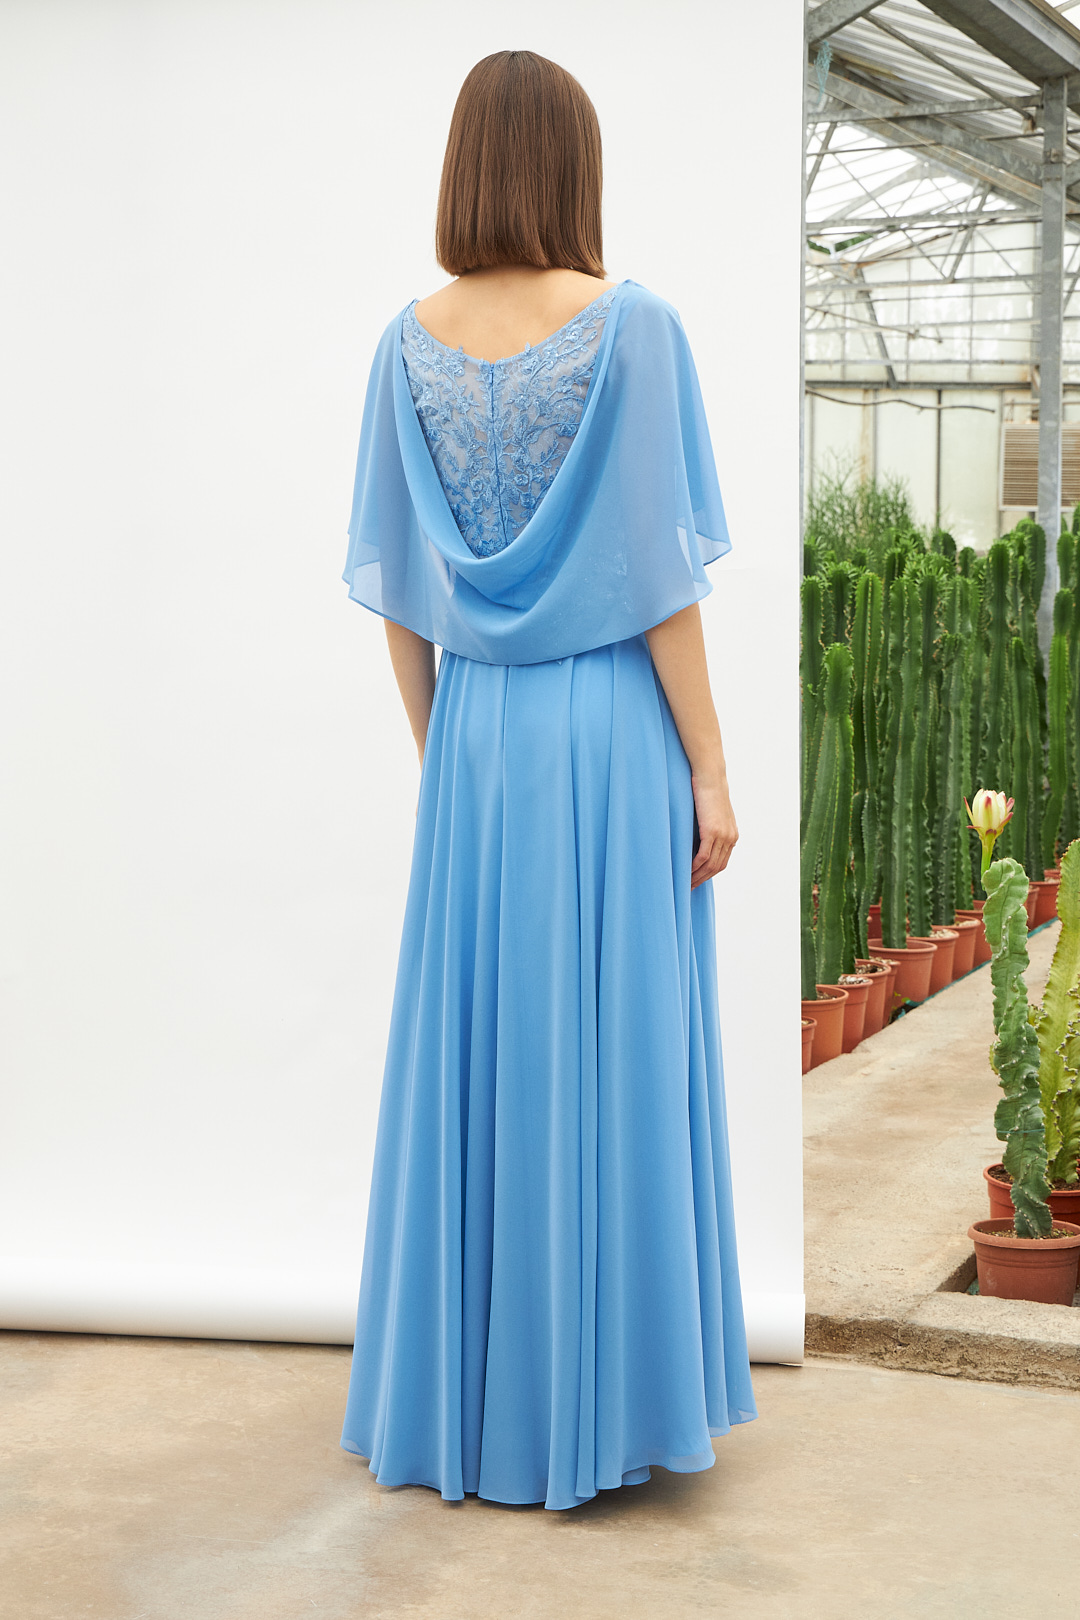 Классические платья / Long classic chiffon dress with lace and beaded top for the mother of the bride